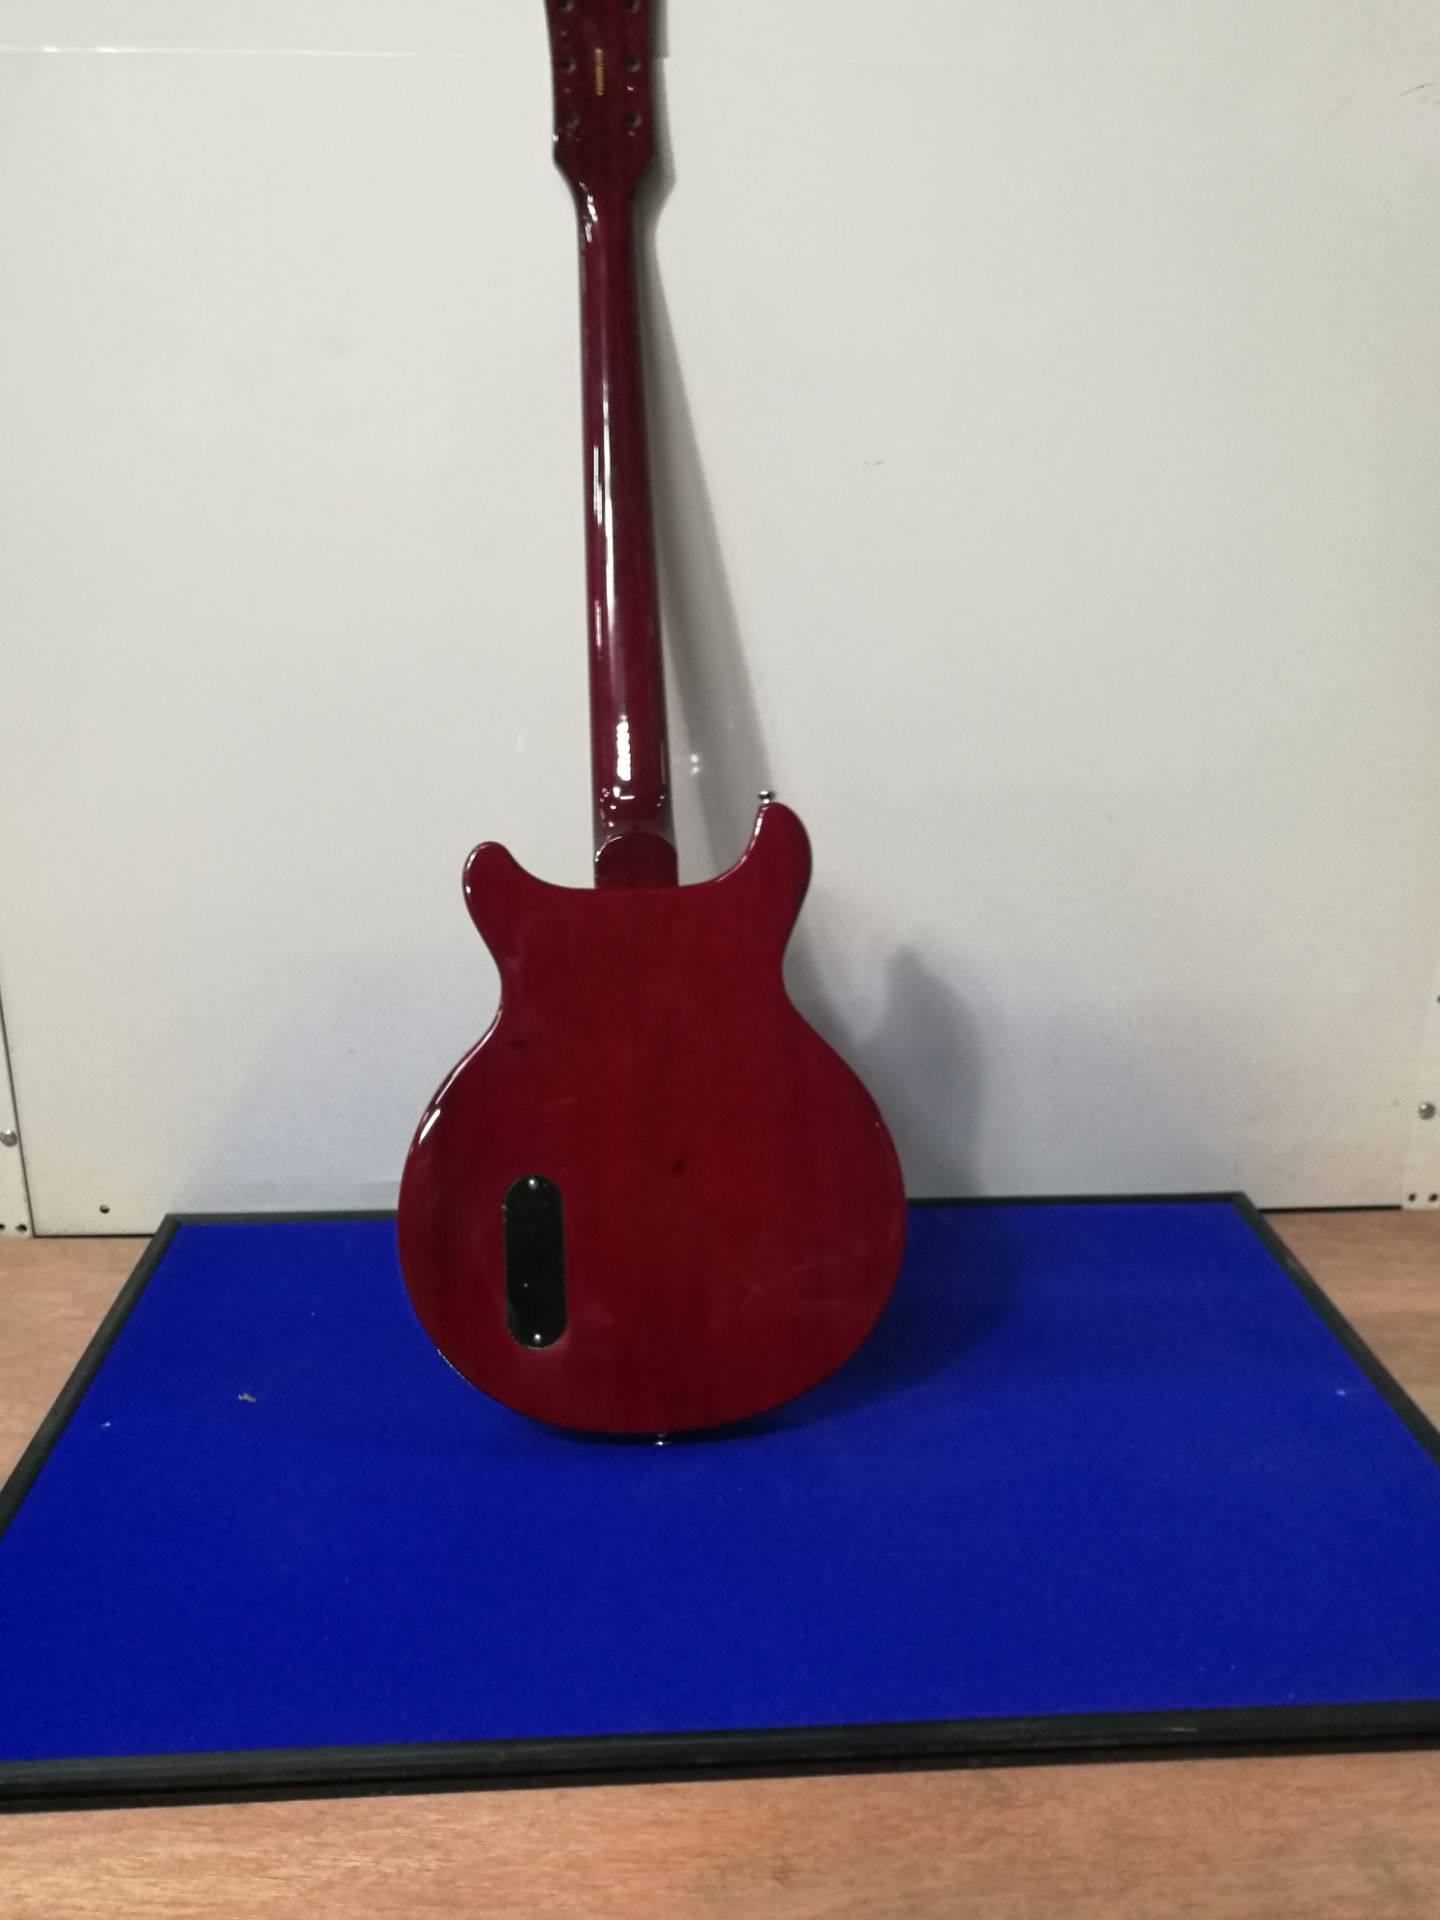 Vintage Electric Guitar - Cherry Red Finish | MISSING MACHINE HEADS | BRIDGE NEEDS REATTACHING - Image 6 of 6